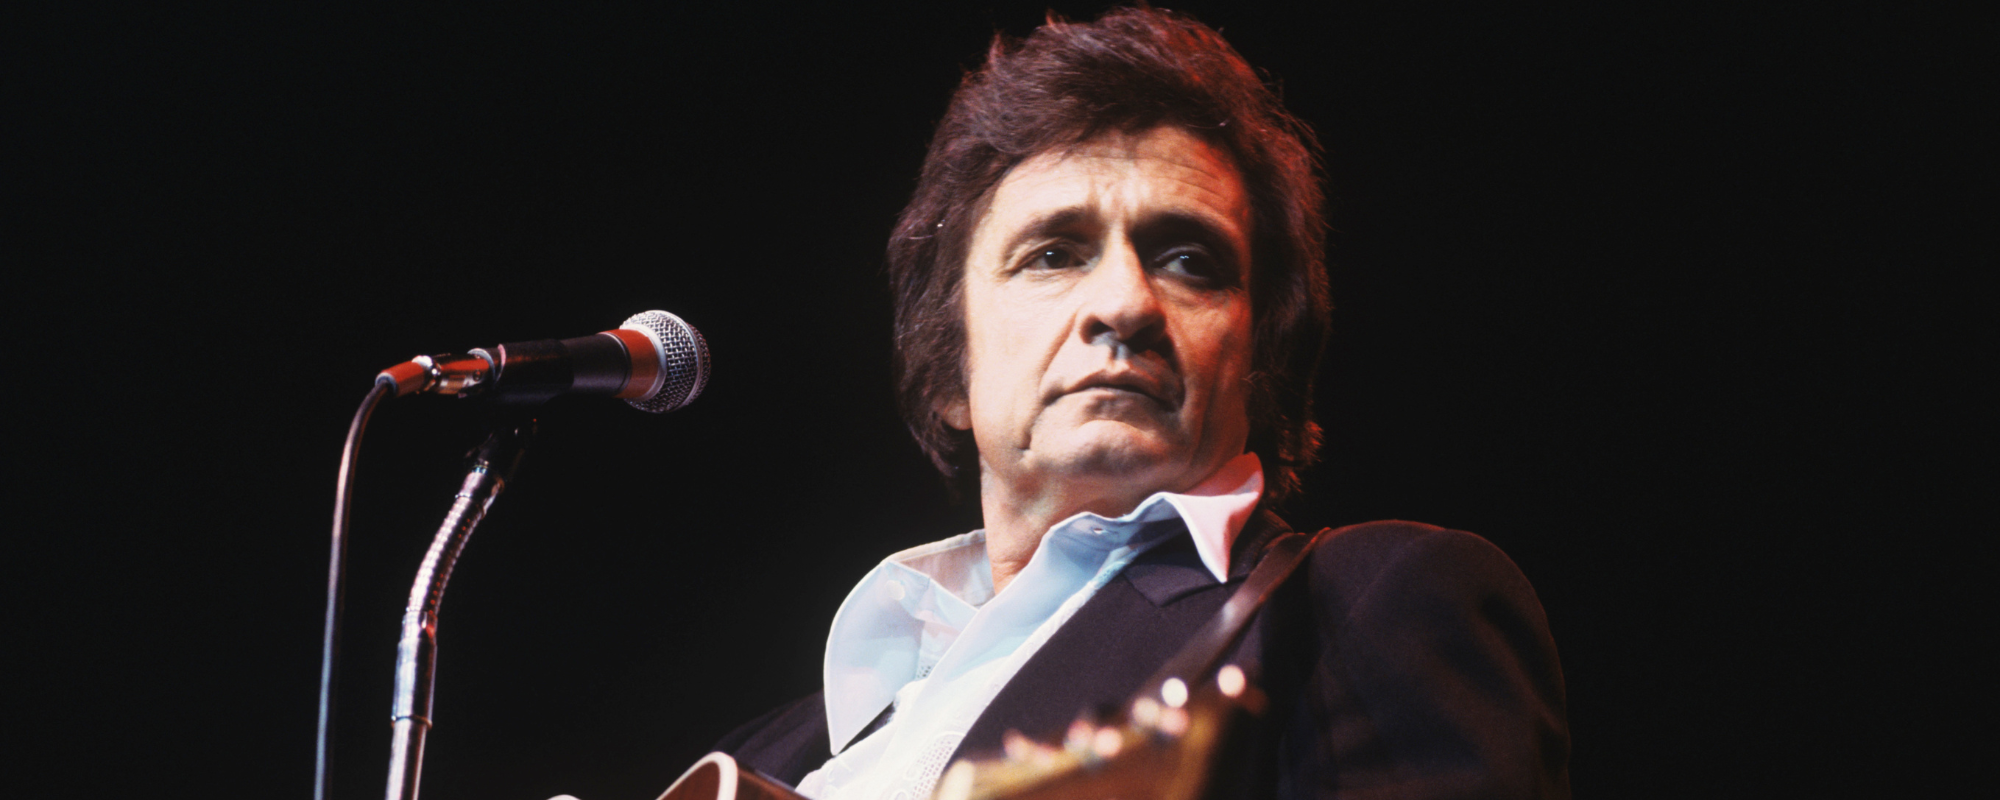 The Meaning Behind “The Man Comes Around” by Johnny Cash